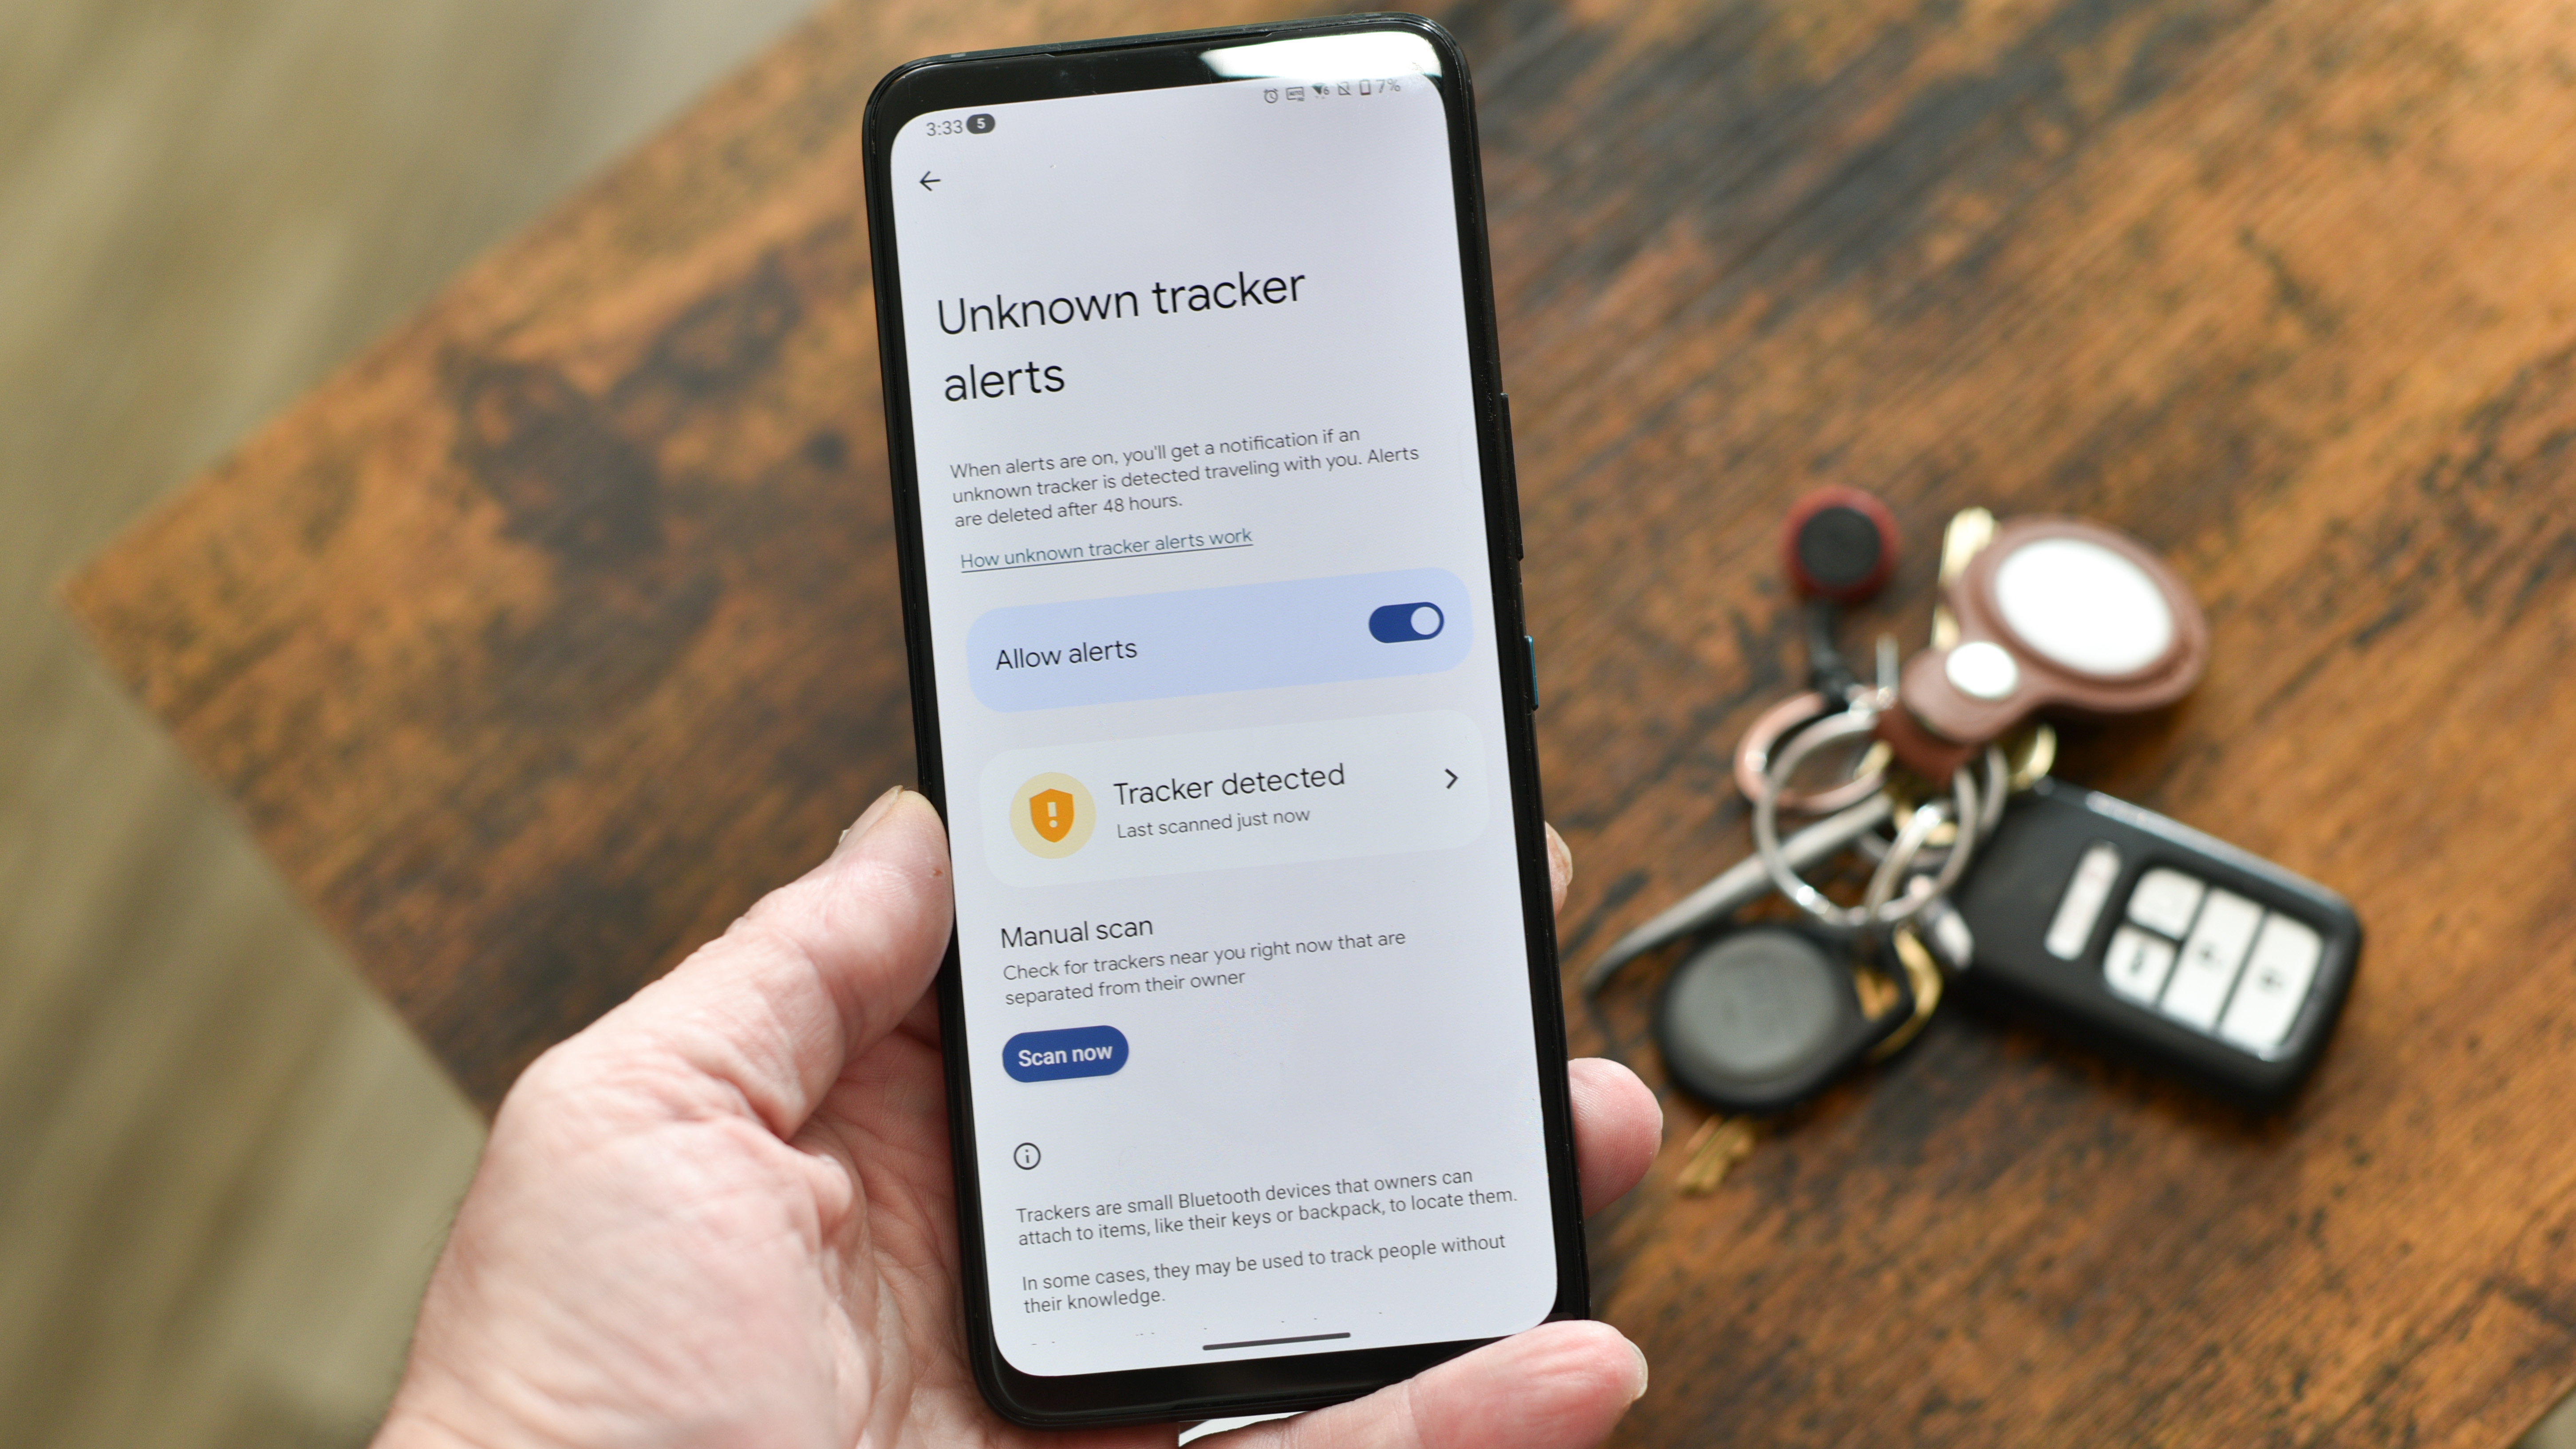 Unknown tracker alerts screen on an Asus phone with keychain and AirTag behind